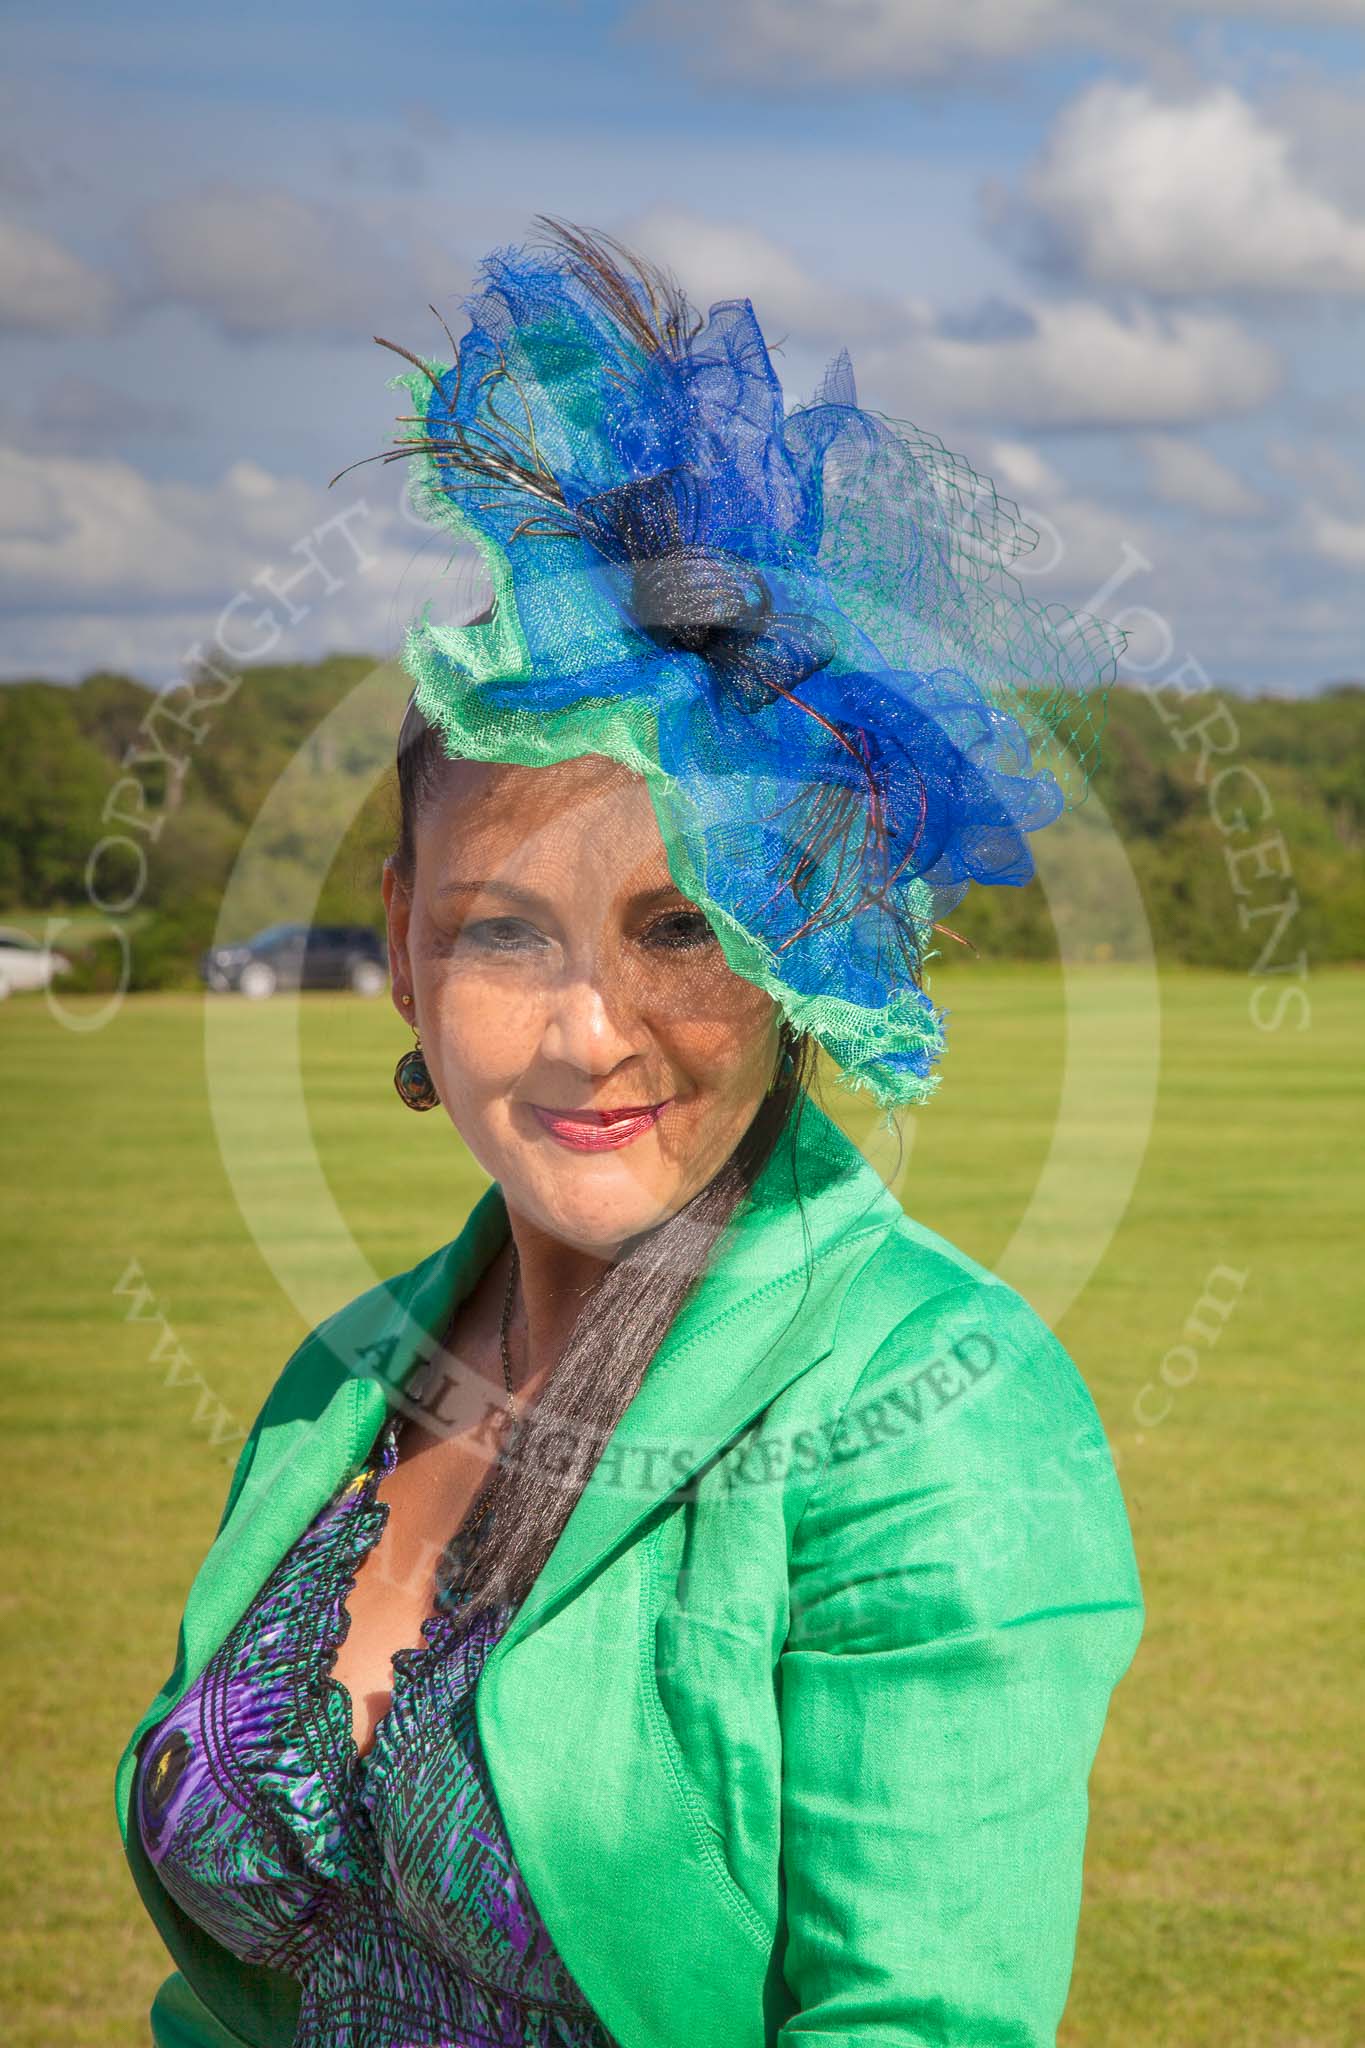 7th Heritage Polo Cup finals: Jennifer Cattlin wearing one of her Millinery Creations 2012..
Hurtwood Park Polo Club,
Ewhurst Green,
Surrey,
United Kingdom,
on 05 August 2012 at 16:47, image #228